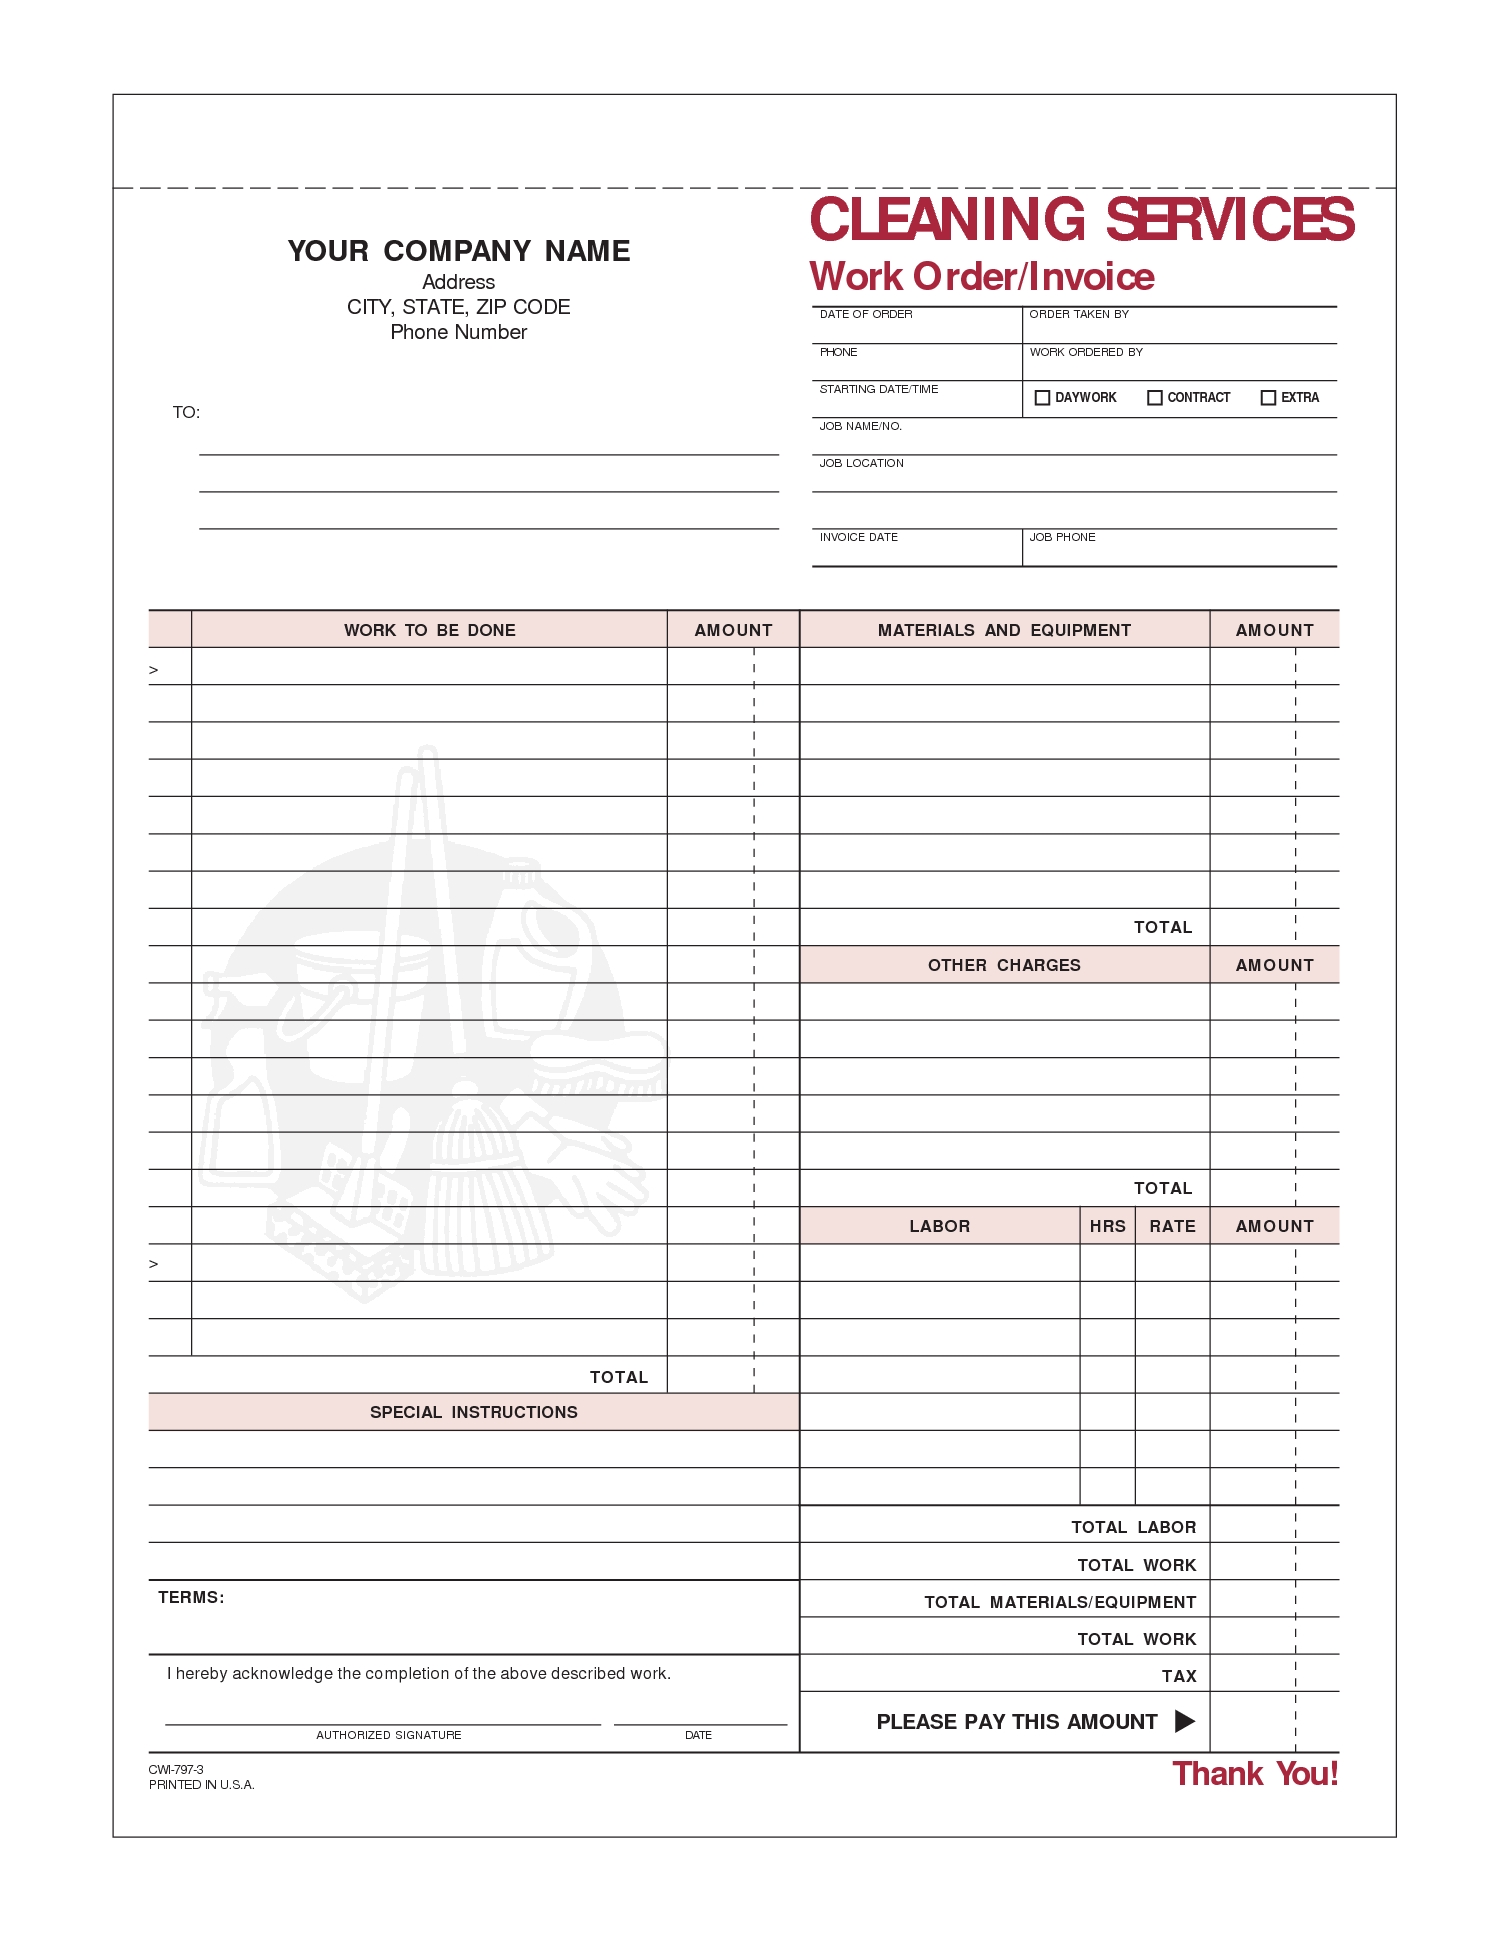 20 best photos of templates for cleaning services janitorial sample cleaning invoice